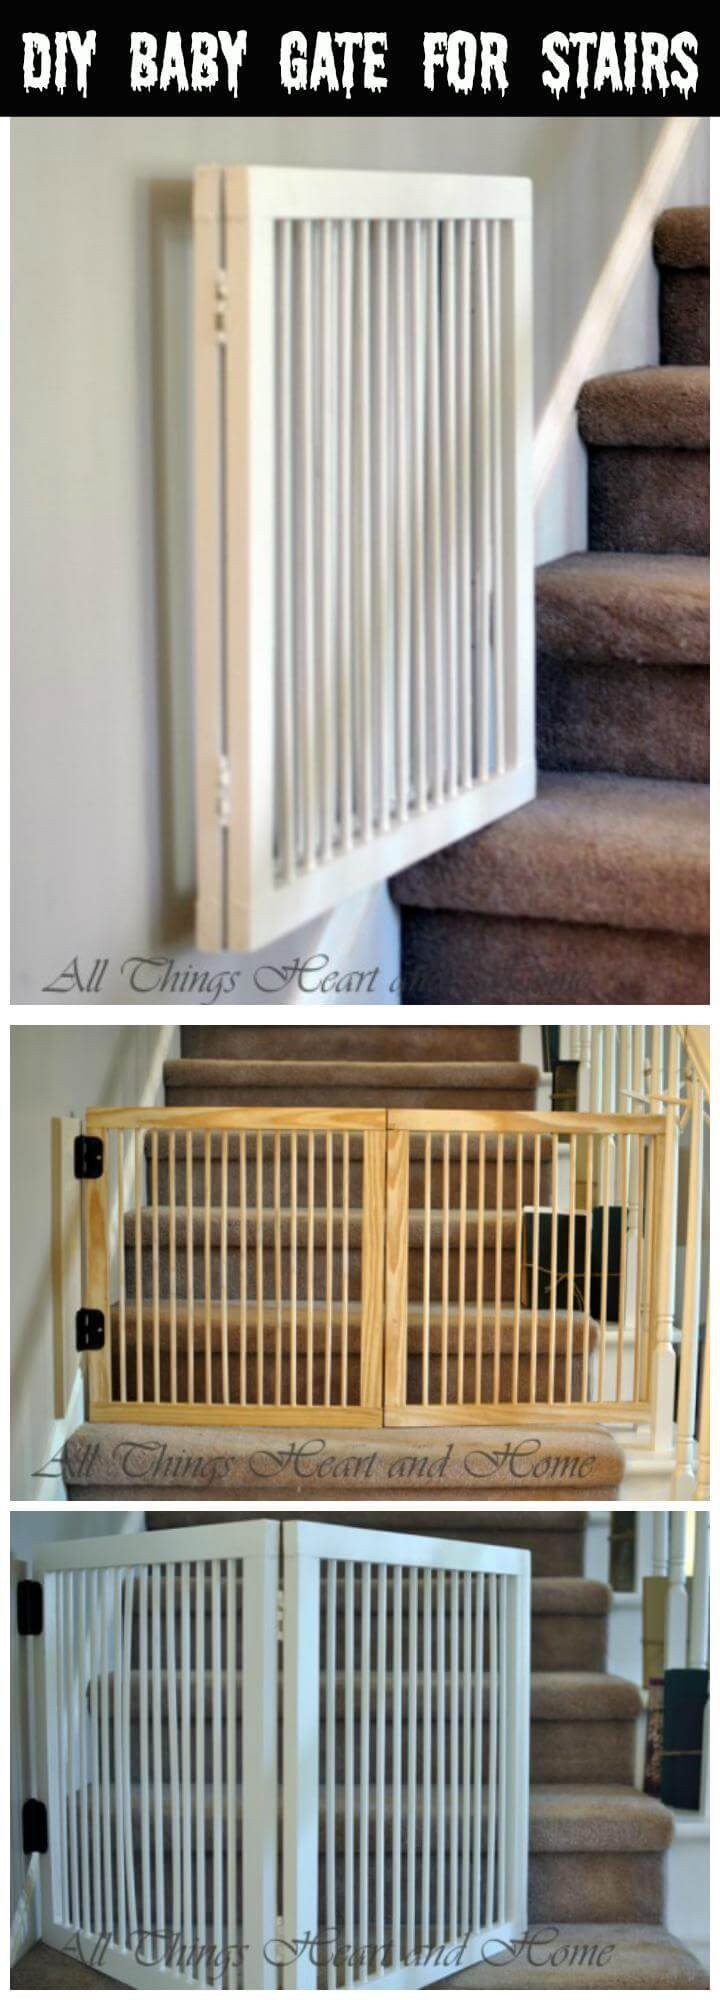 DIY Baby Gate For Stairs
 30 Best DIY Baby Gate Tutorials on Cheap Bud